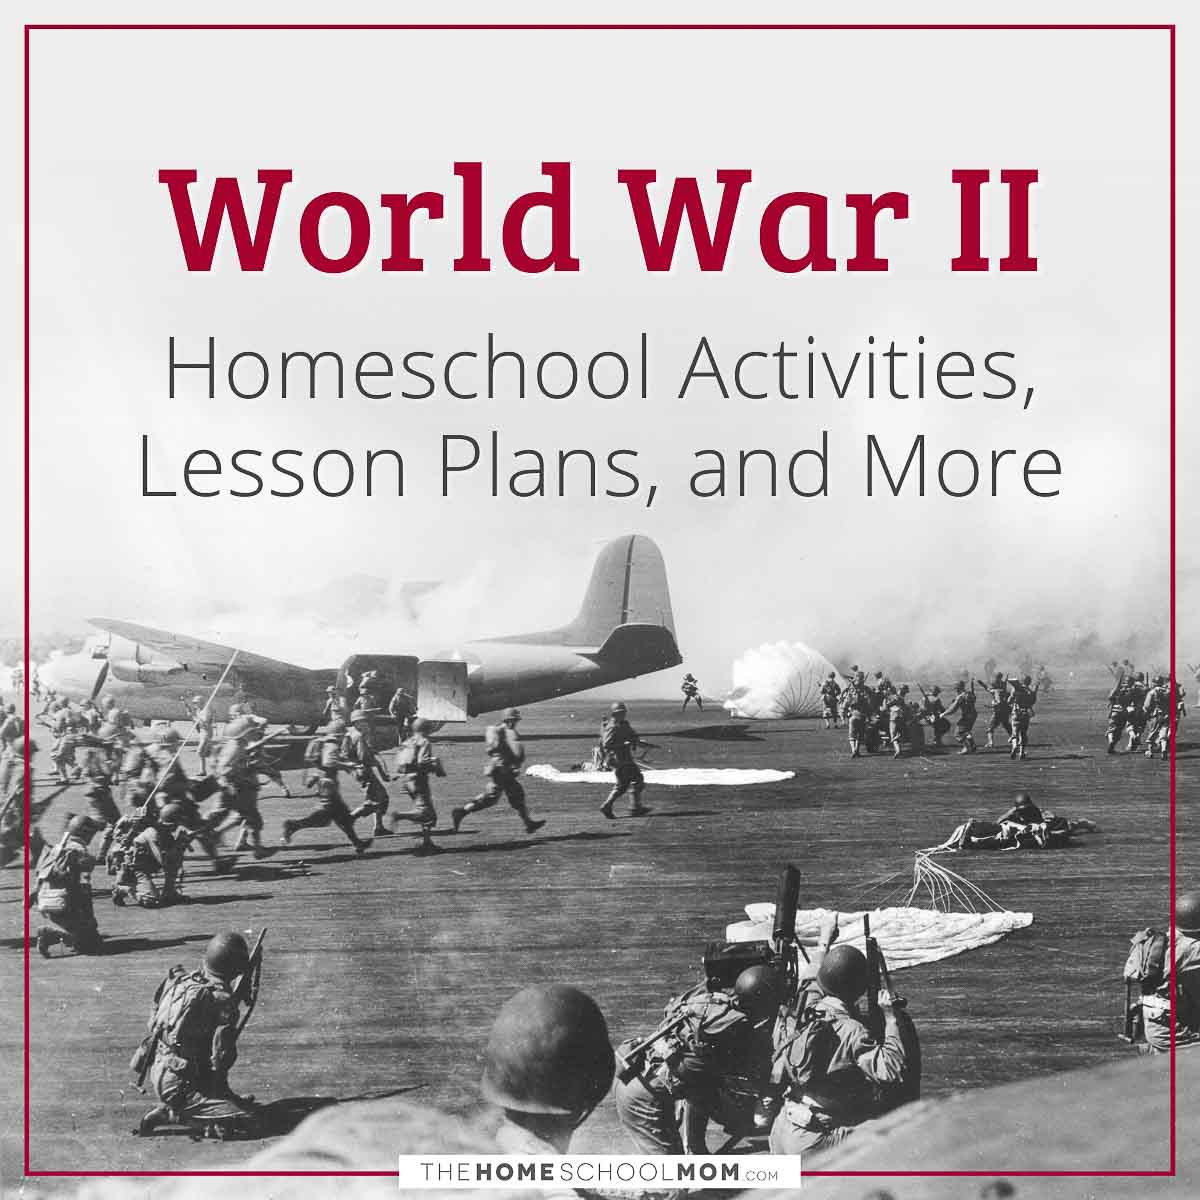 World War II Homeschool Activities, Lesson Plans, and More.